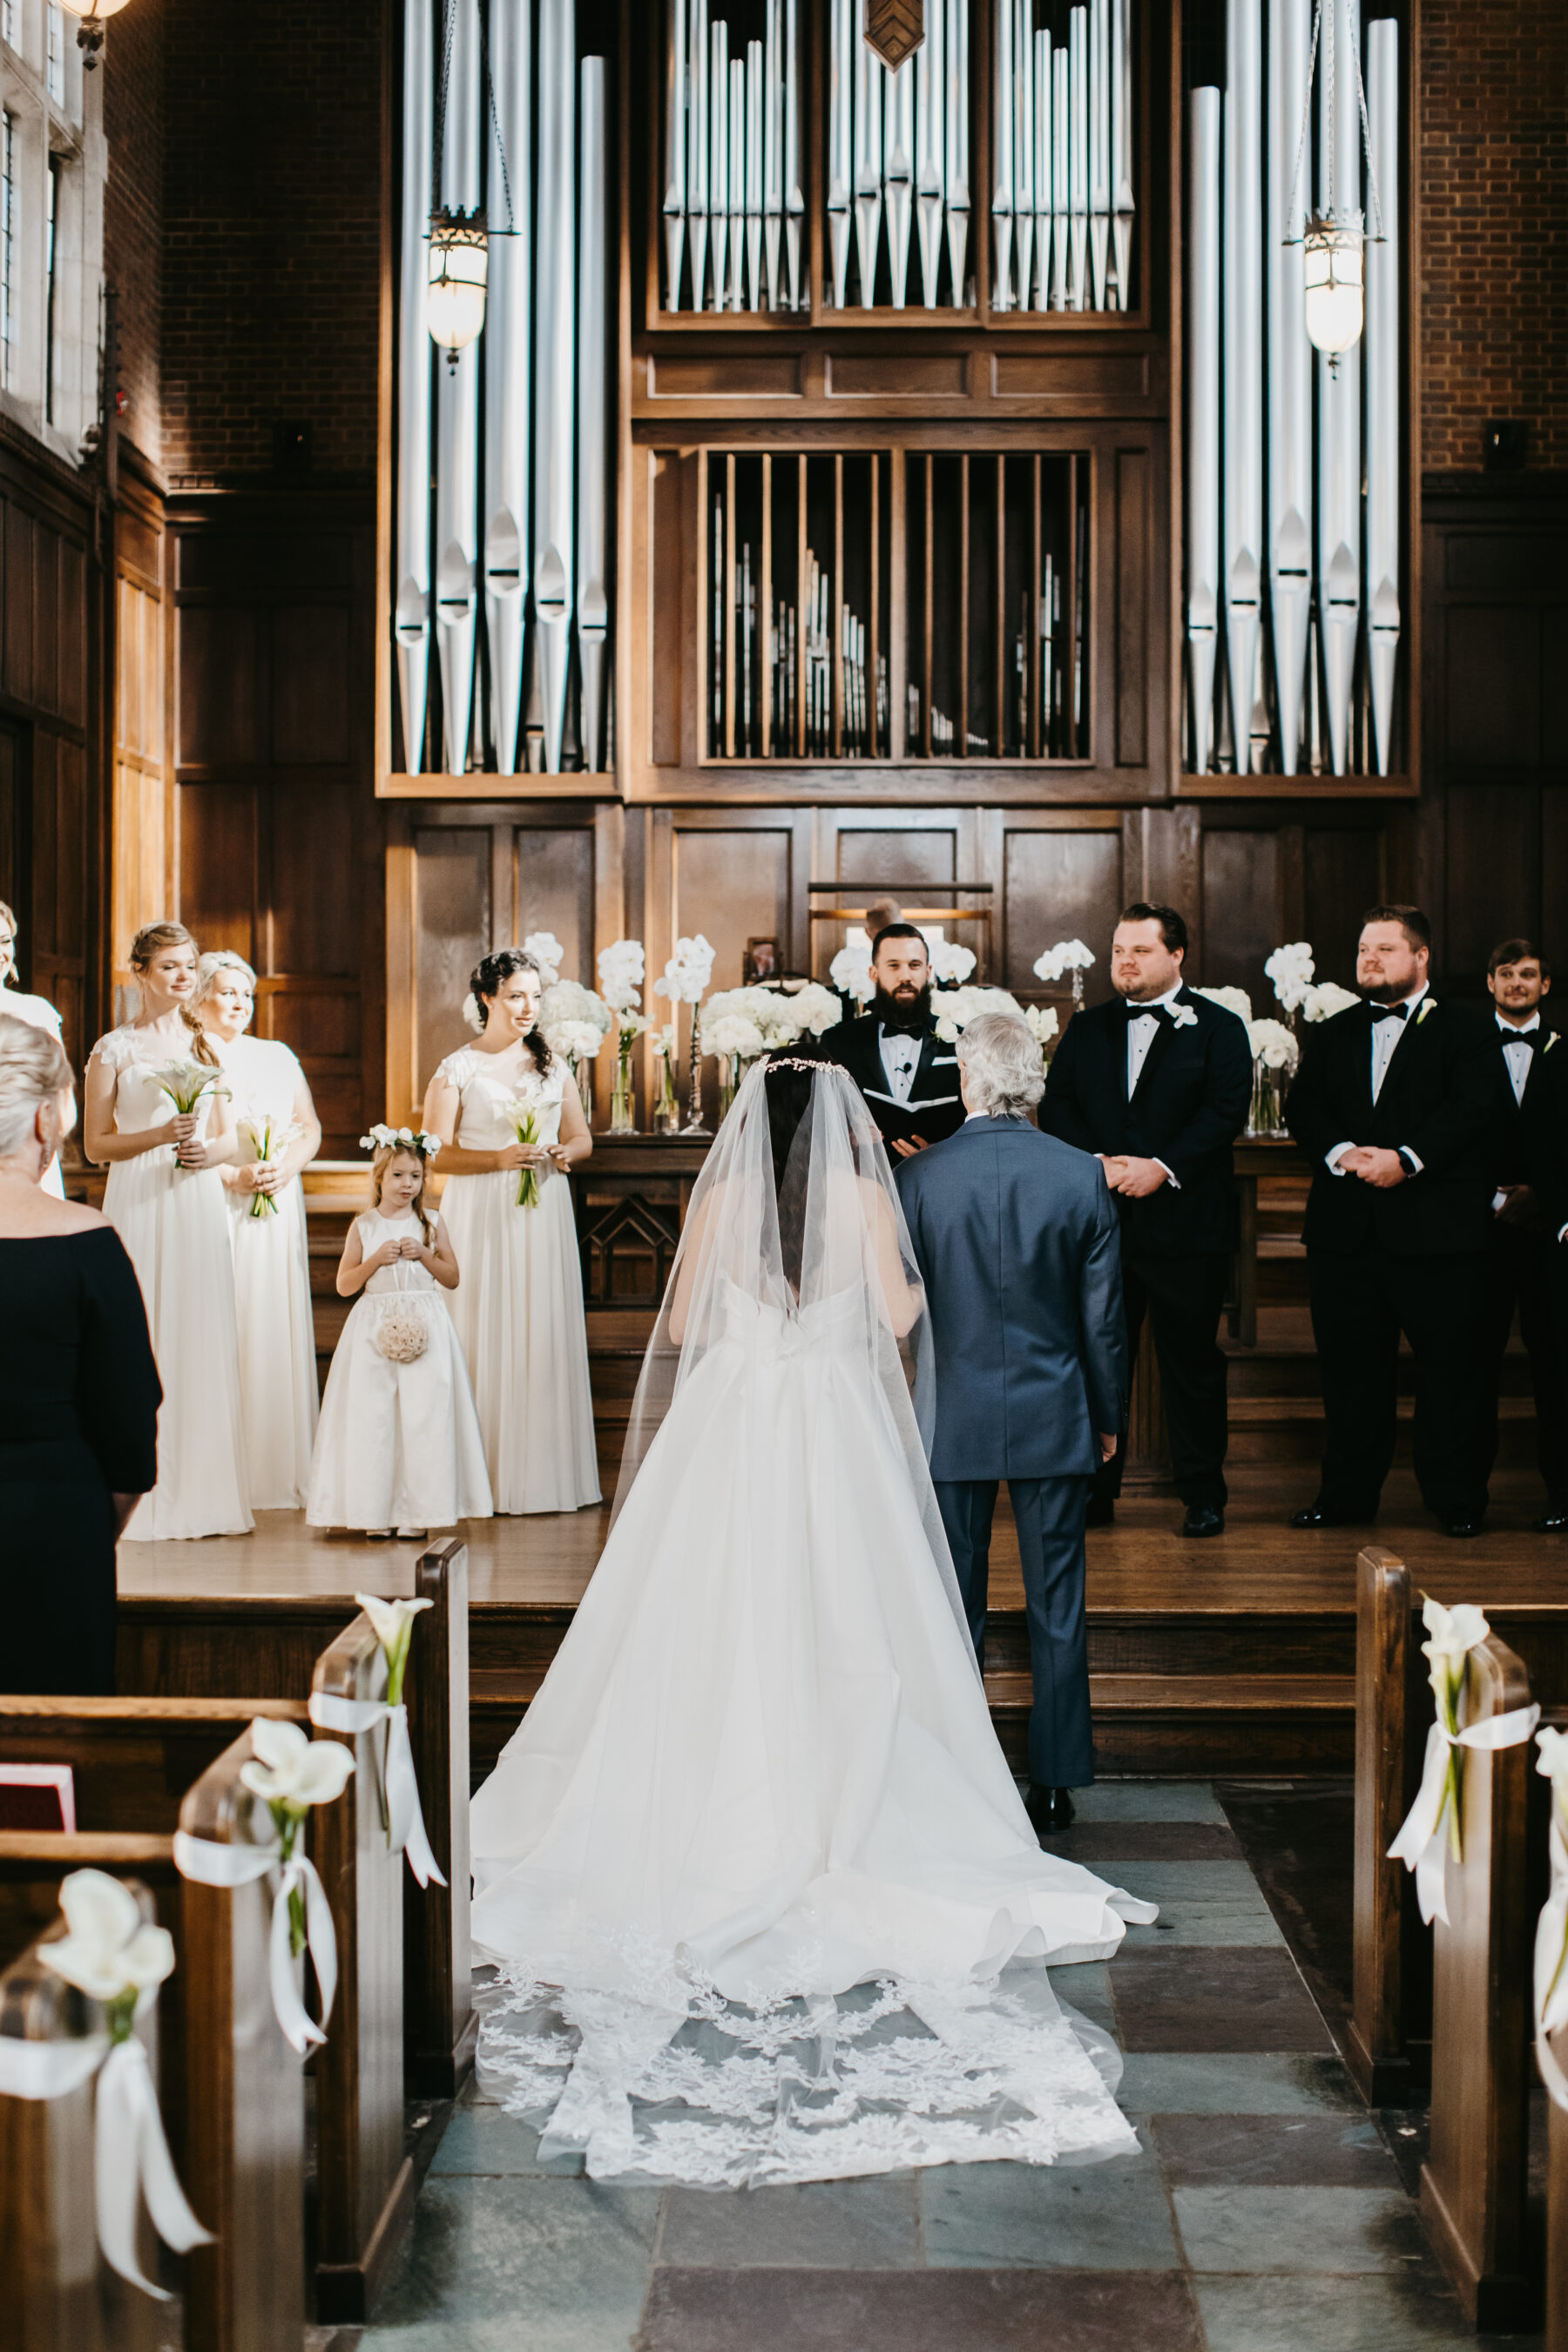 The Bell Tower wedding ceremony | Nashville Bride Guide